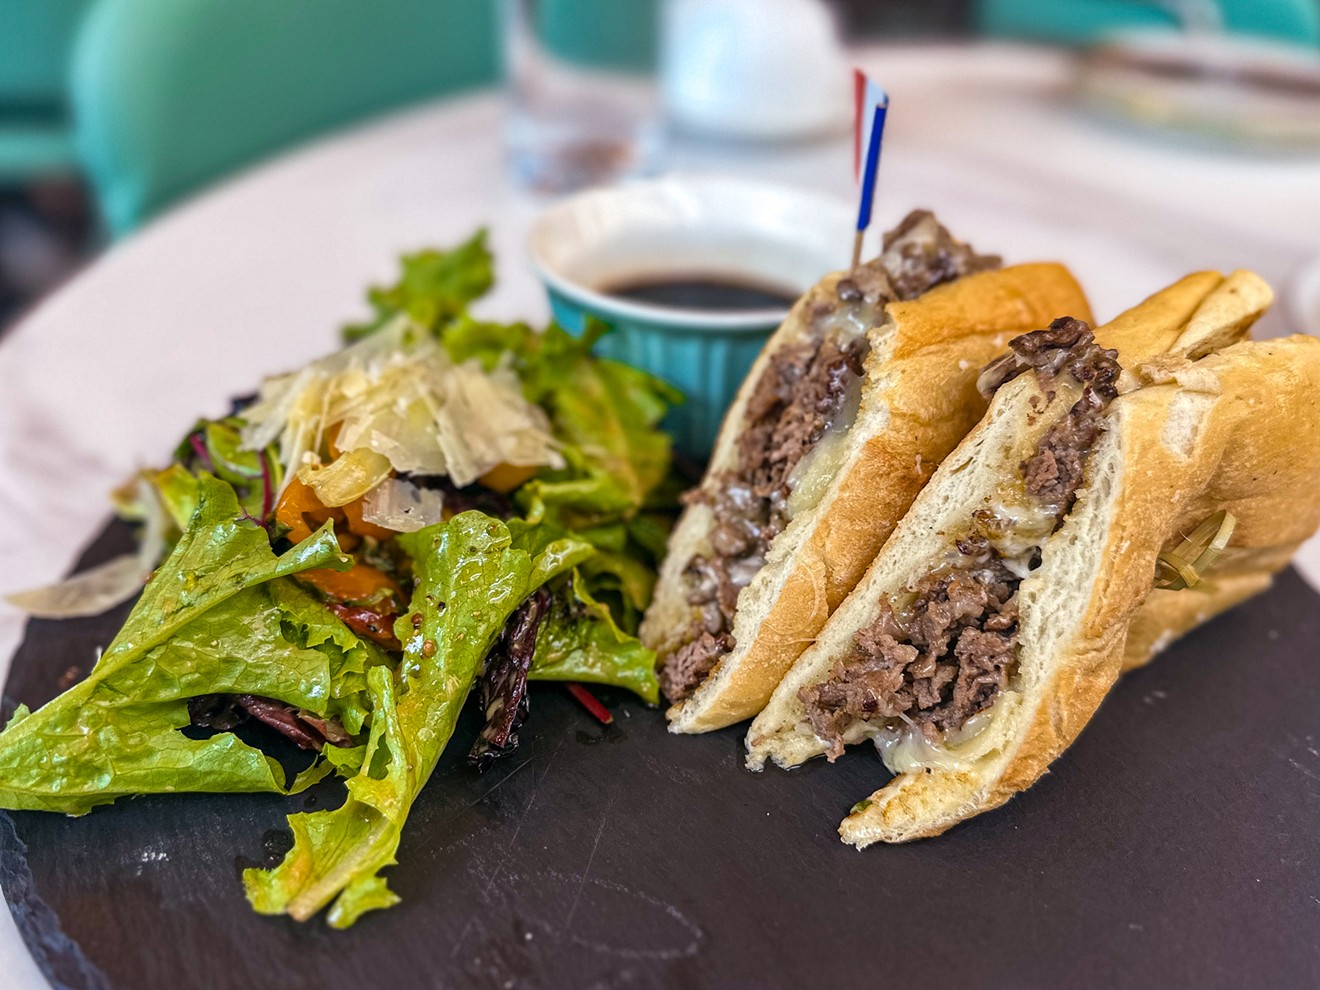 La Parisienne's take on the French Dip, complete with a wonderful side salad.